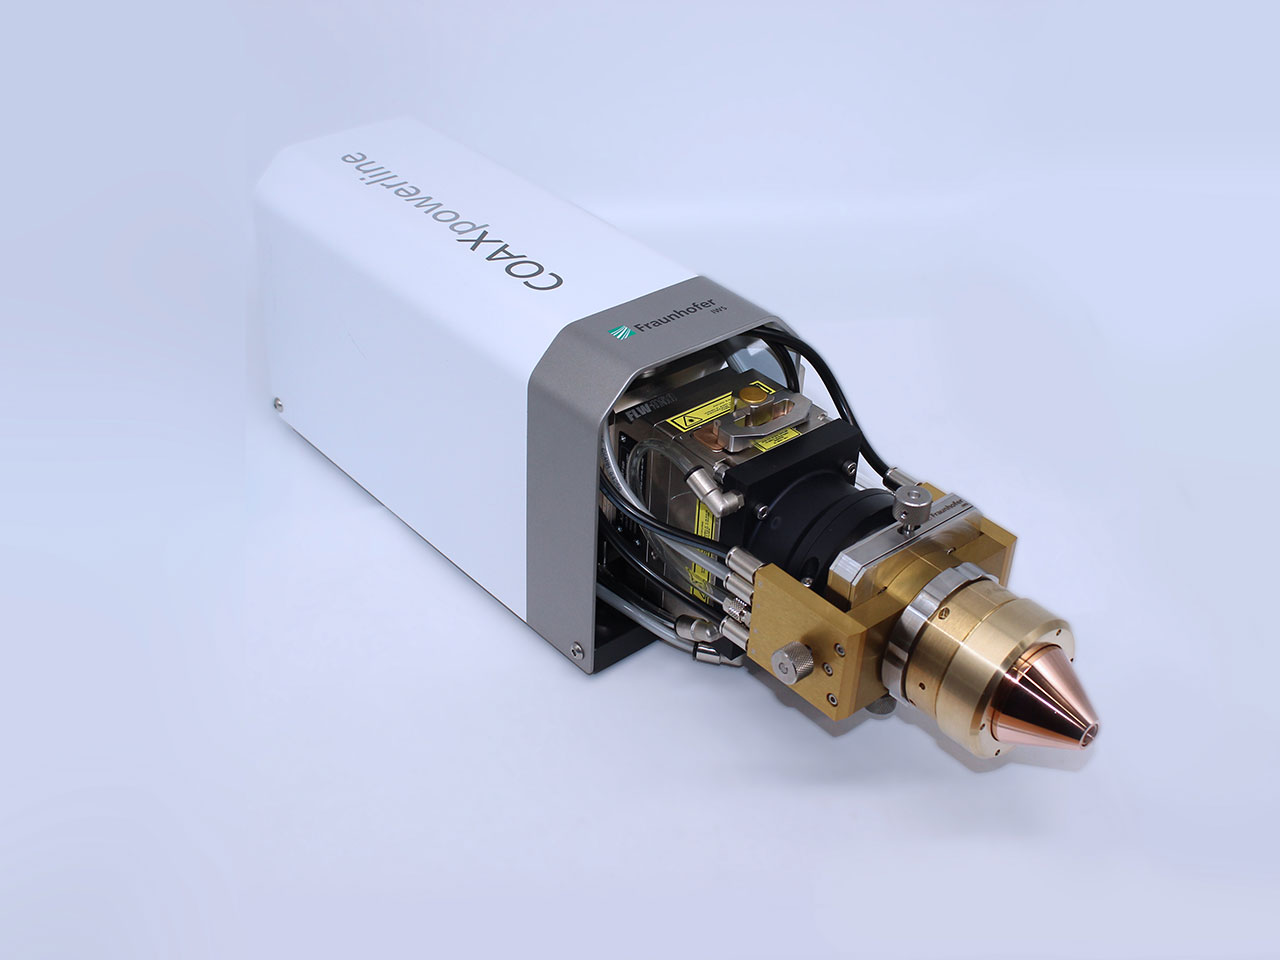 For a wide industrial use and high flexibility, the COAXpowerline annular gap powder nozzle was developed as a modular universal system with integrated media supply for laser powder cladding.